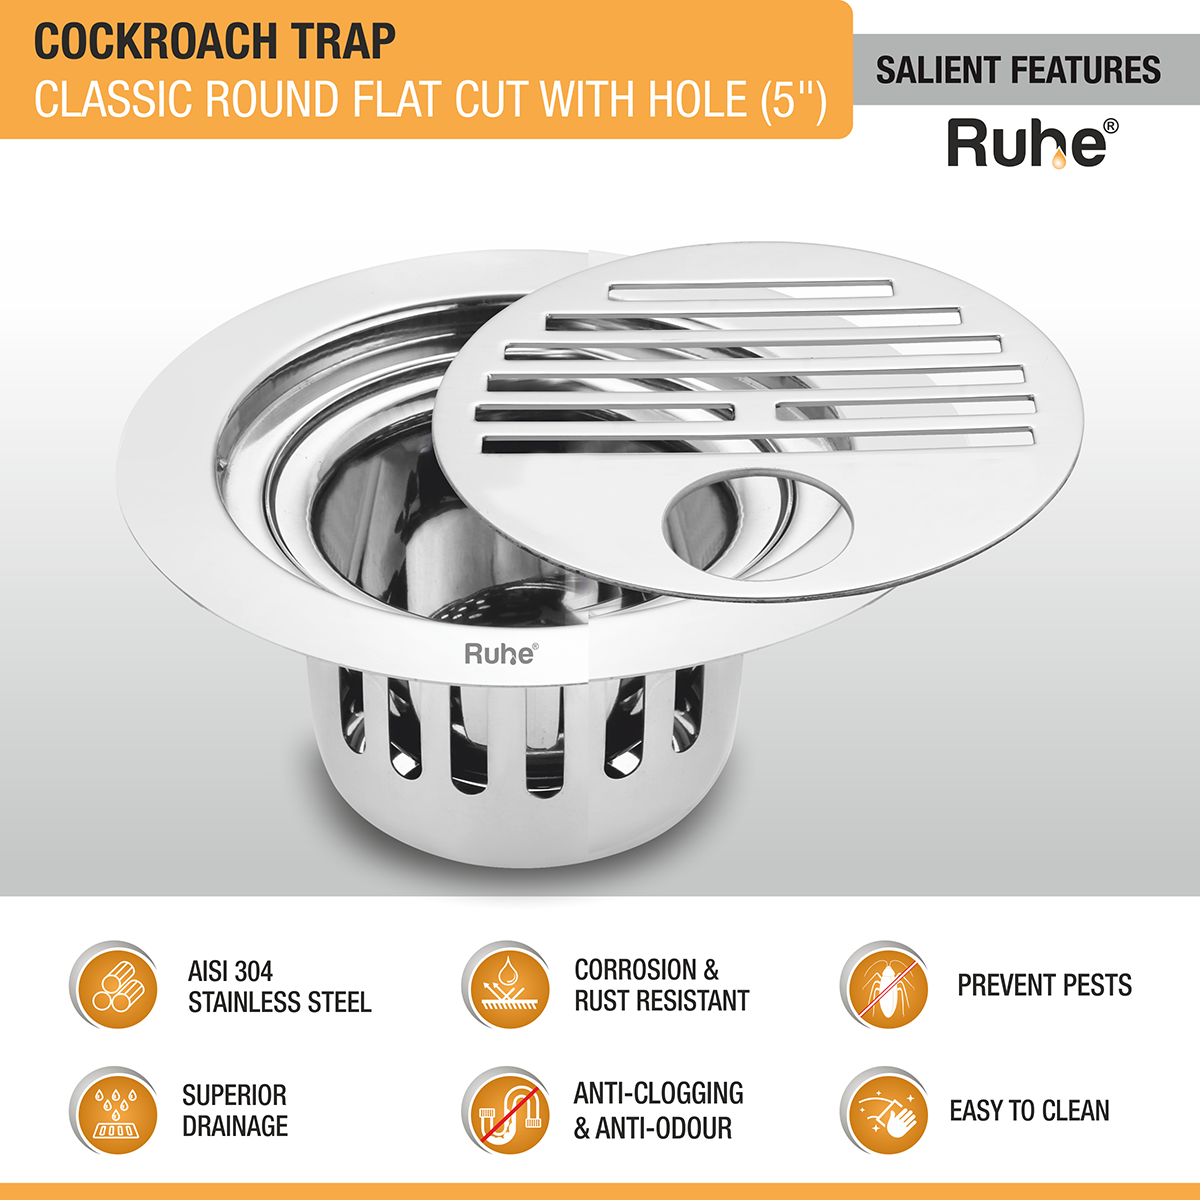 Classic Round Flat Cut Floor Drain (5 Inches) with Hole and Cockroach Trap (304 Grade) features